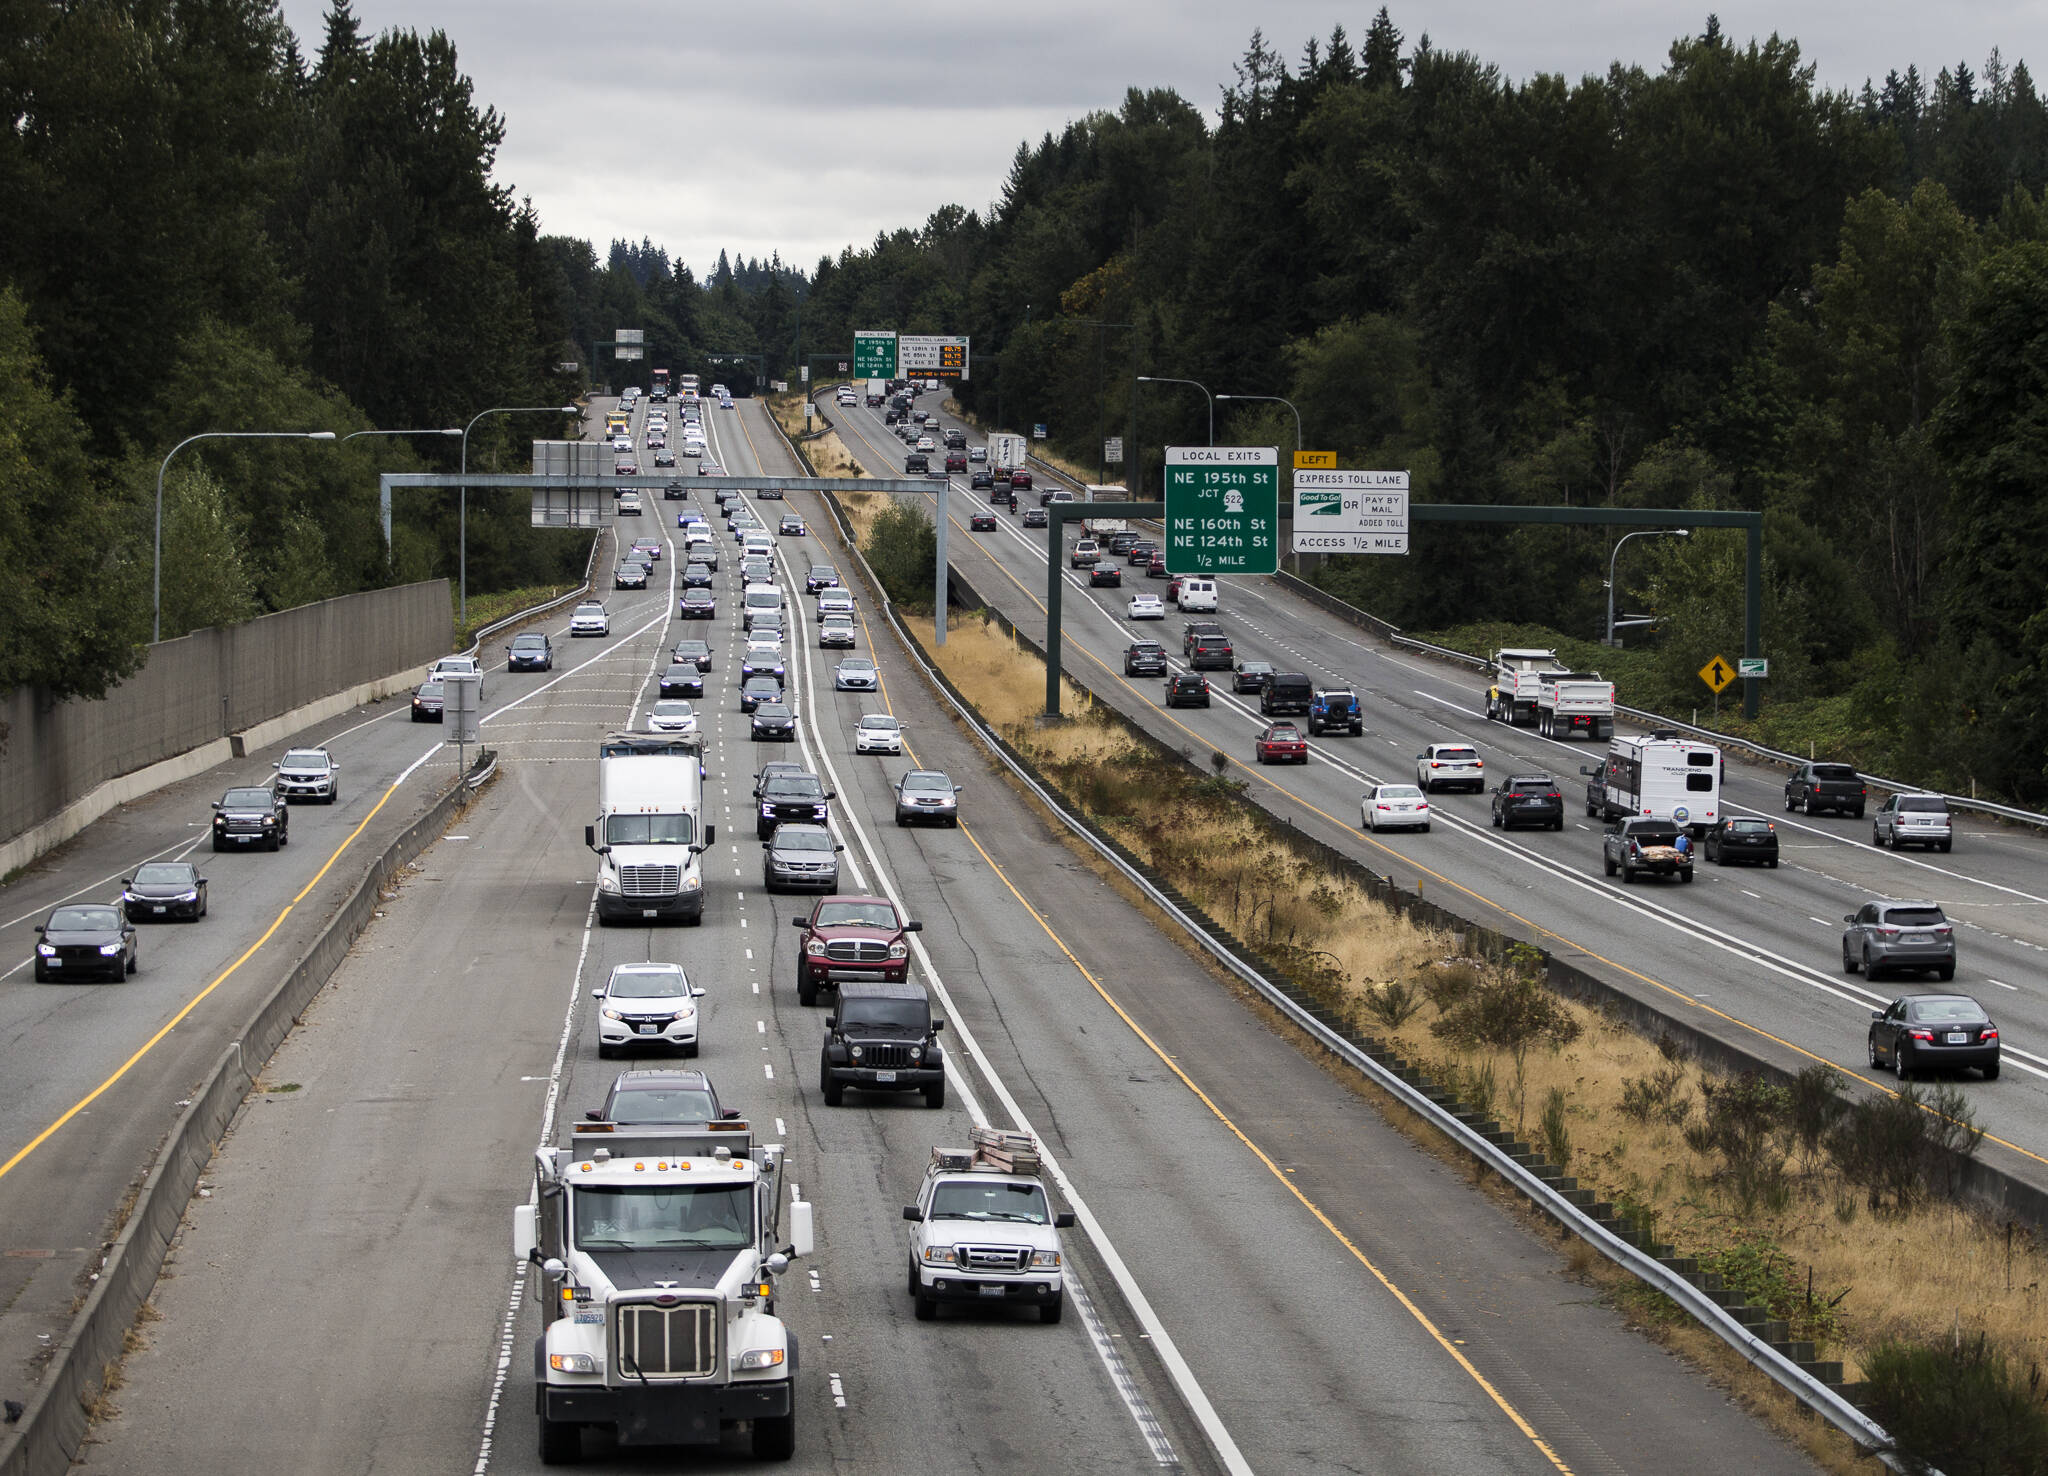 Traffic moves along I-405 between Highway 522 and Highway 527 where WSDOT received the approval to build a second express toll lane on Friday, Aug. 20, 2021 in Bothell, Wash. (Olivia Vanni / The Herald)